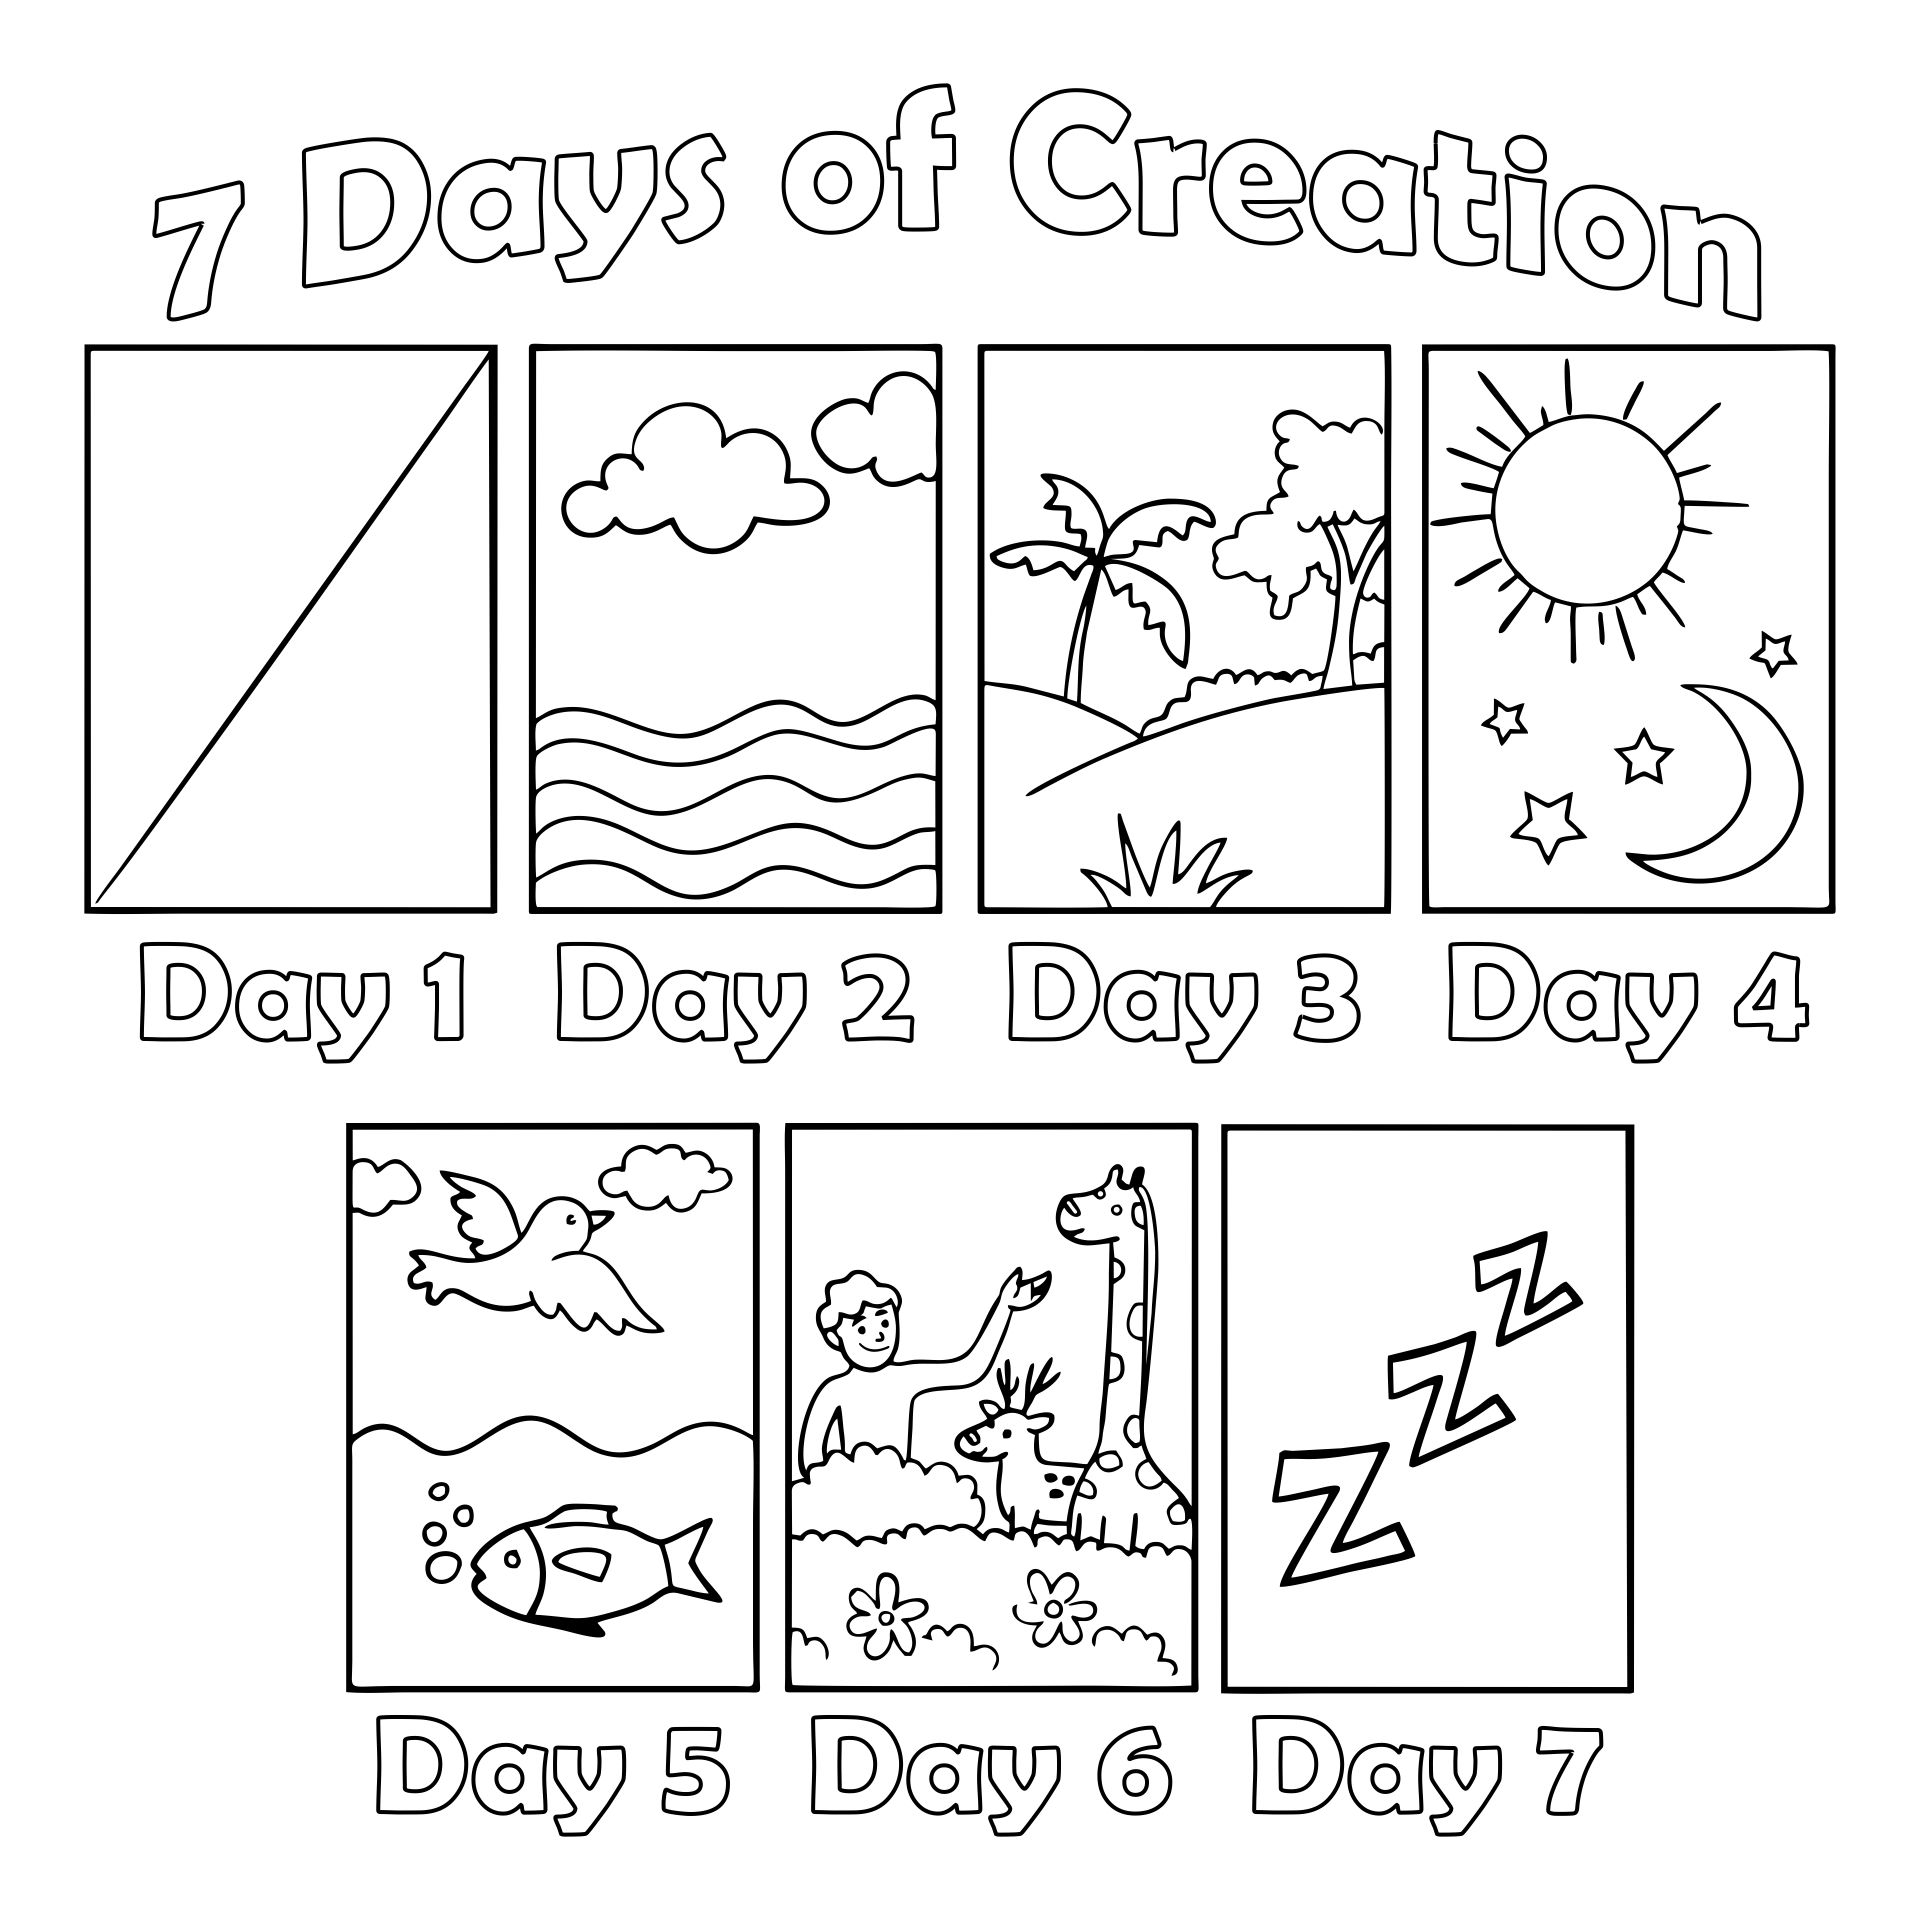 Free Printable Days Of Creation Coloring Pages Aulaiestpdm Blog